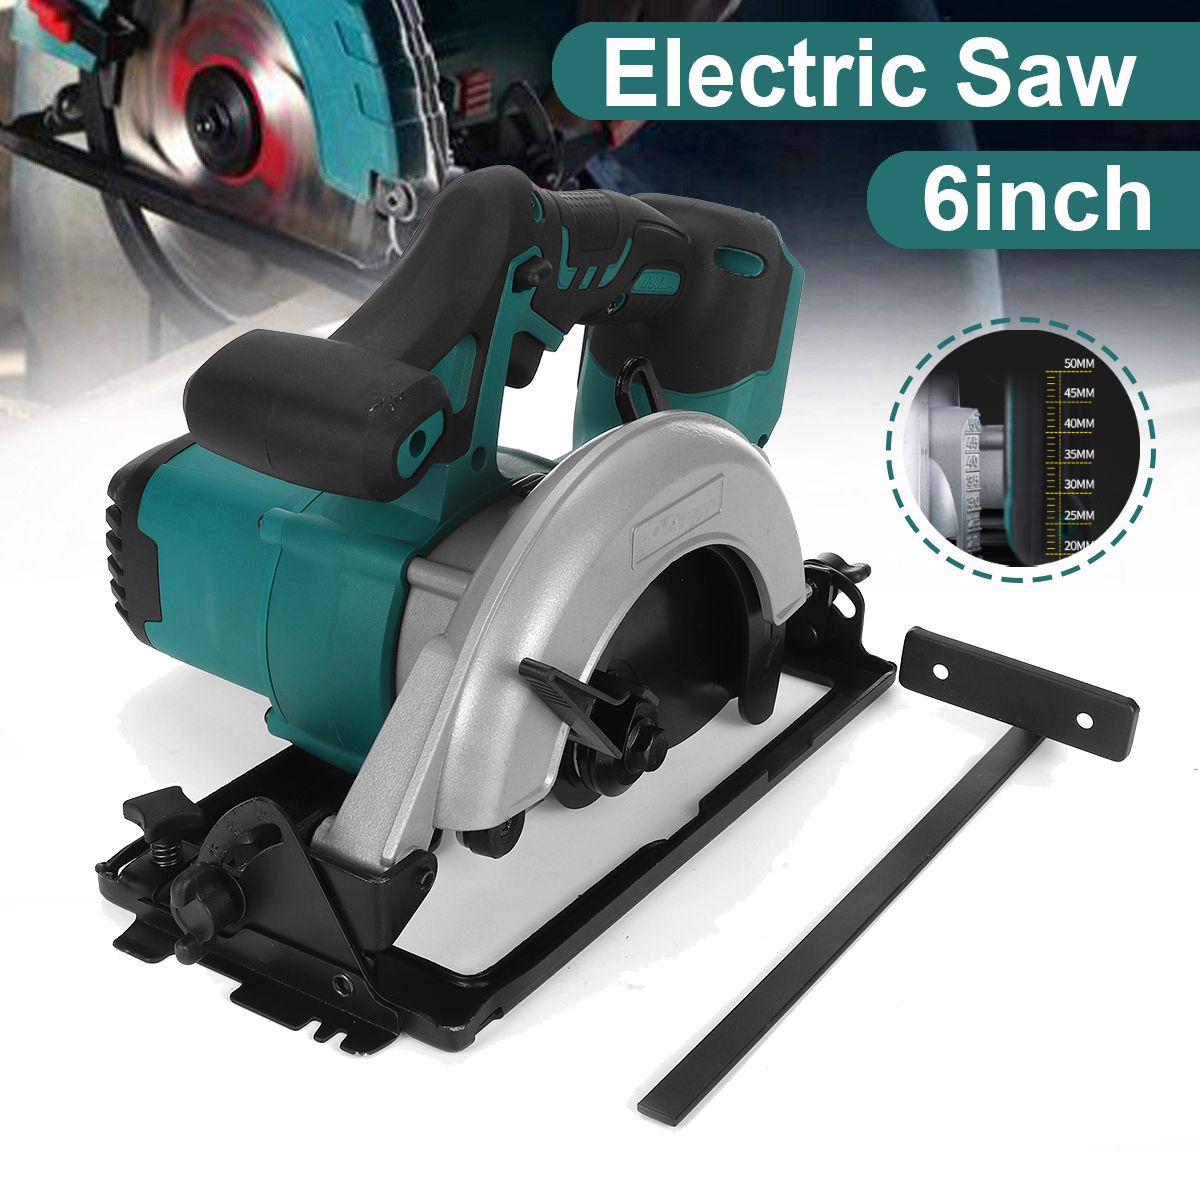 Electric-Circular-Saw-Handle-Power-ToolsCutting-Machine-6-inch-Spindle-size-1744309